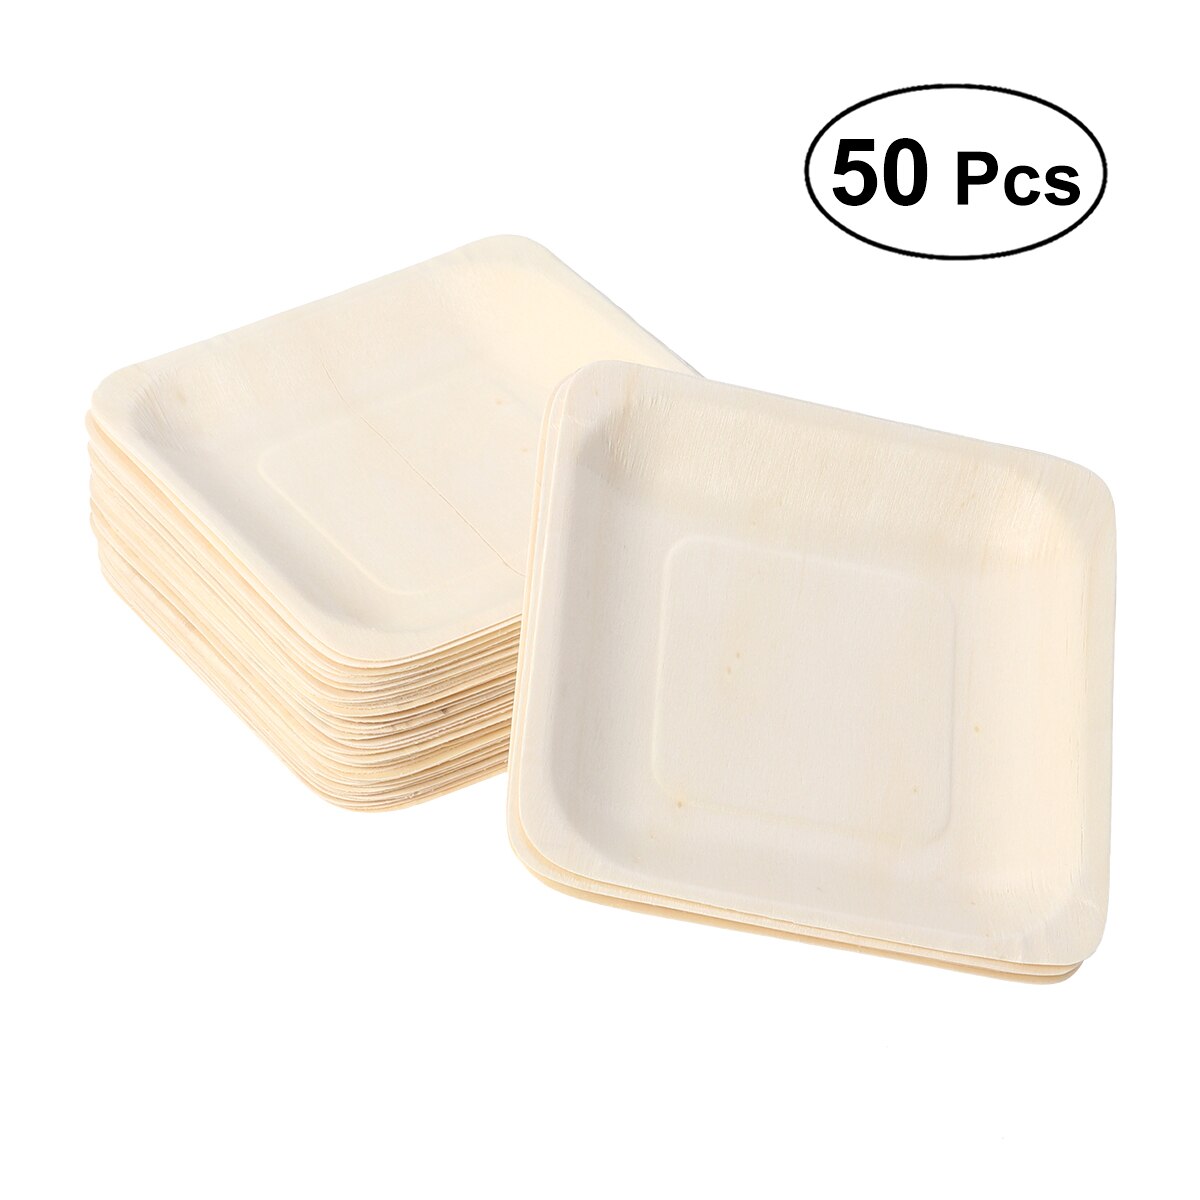 50pcs Square Disposable Wooden Plate Party Plates Tableware for Wedding Restaurant Picnic Birthday 140x140mm